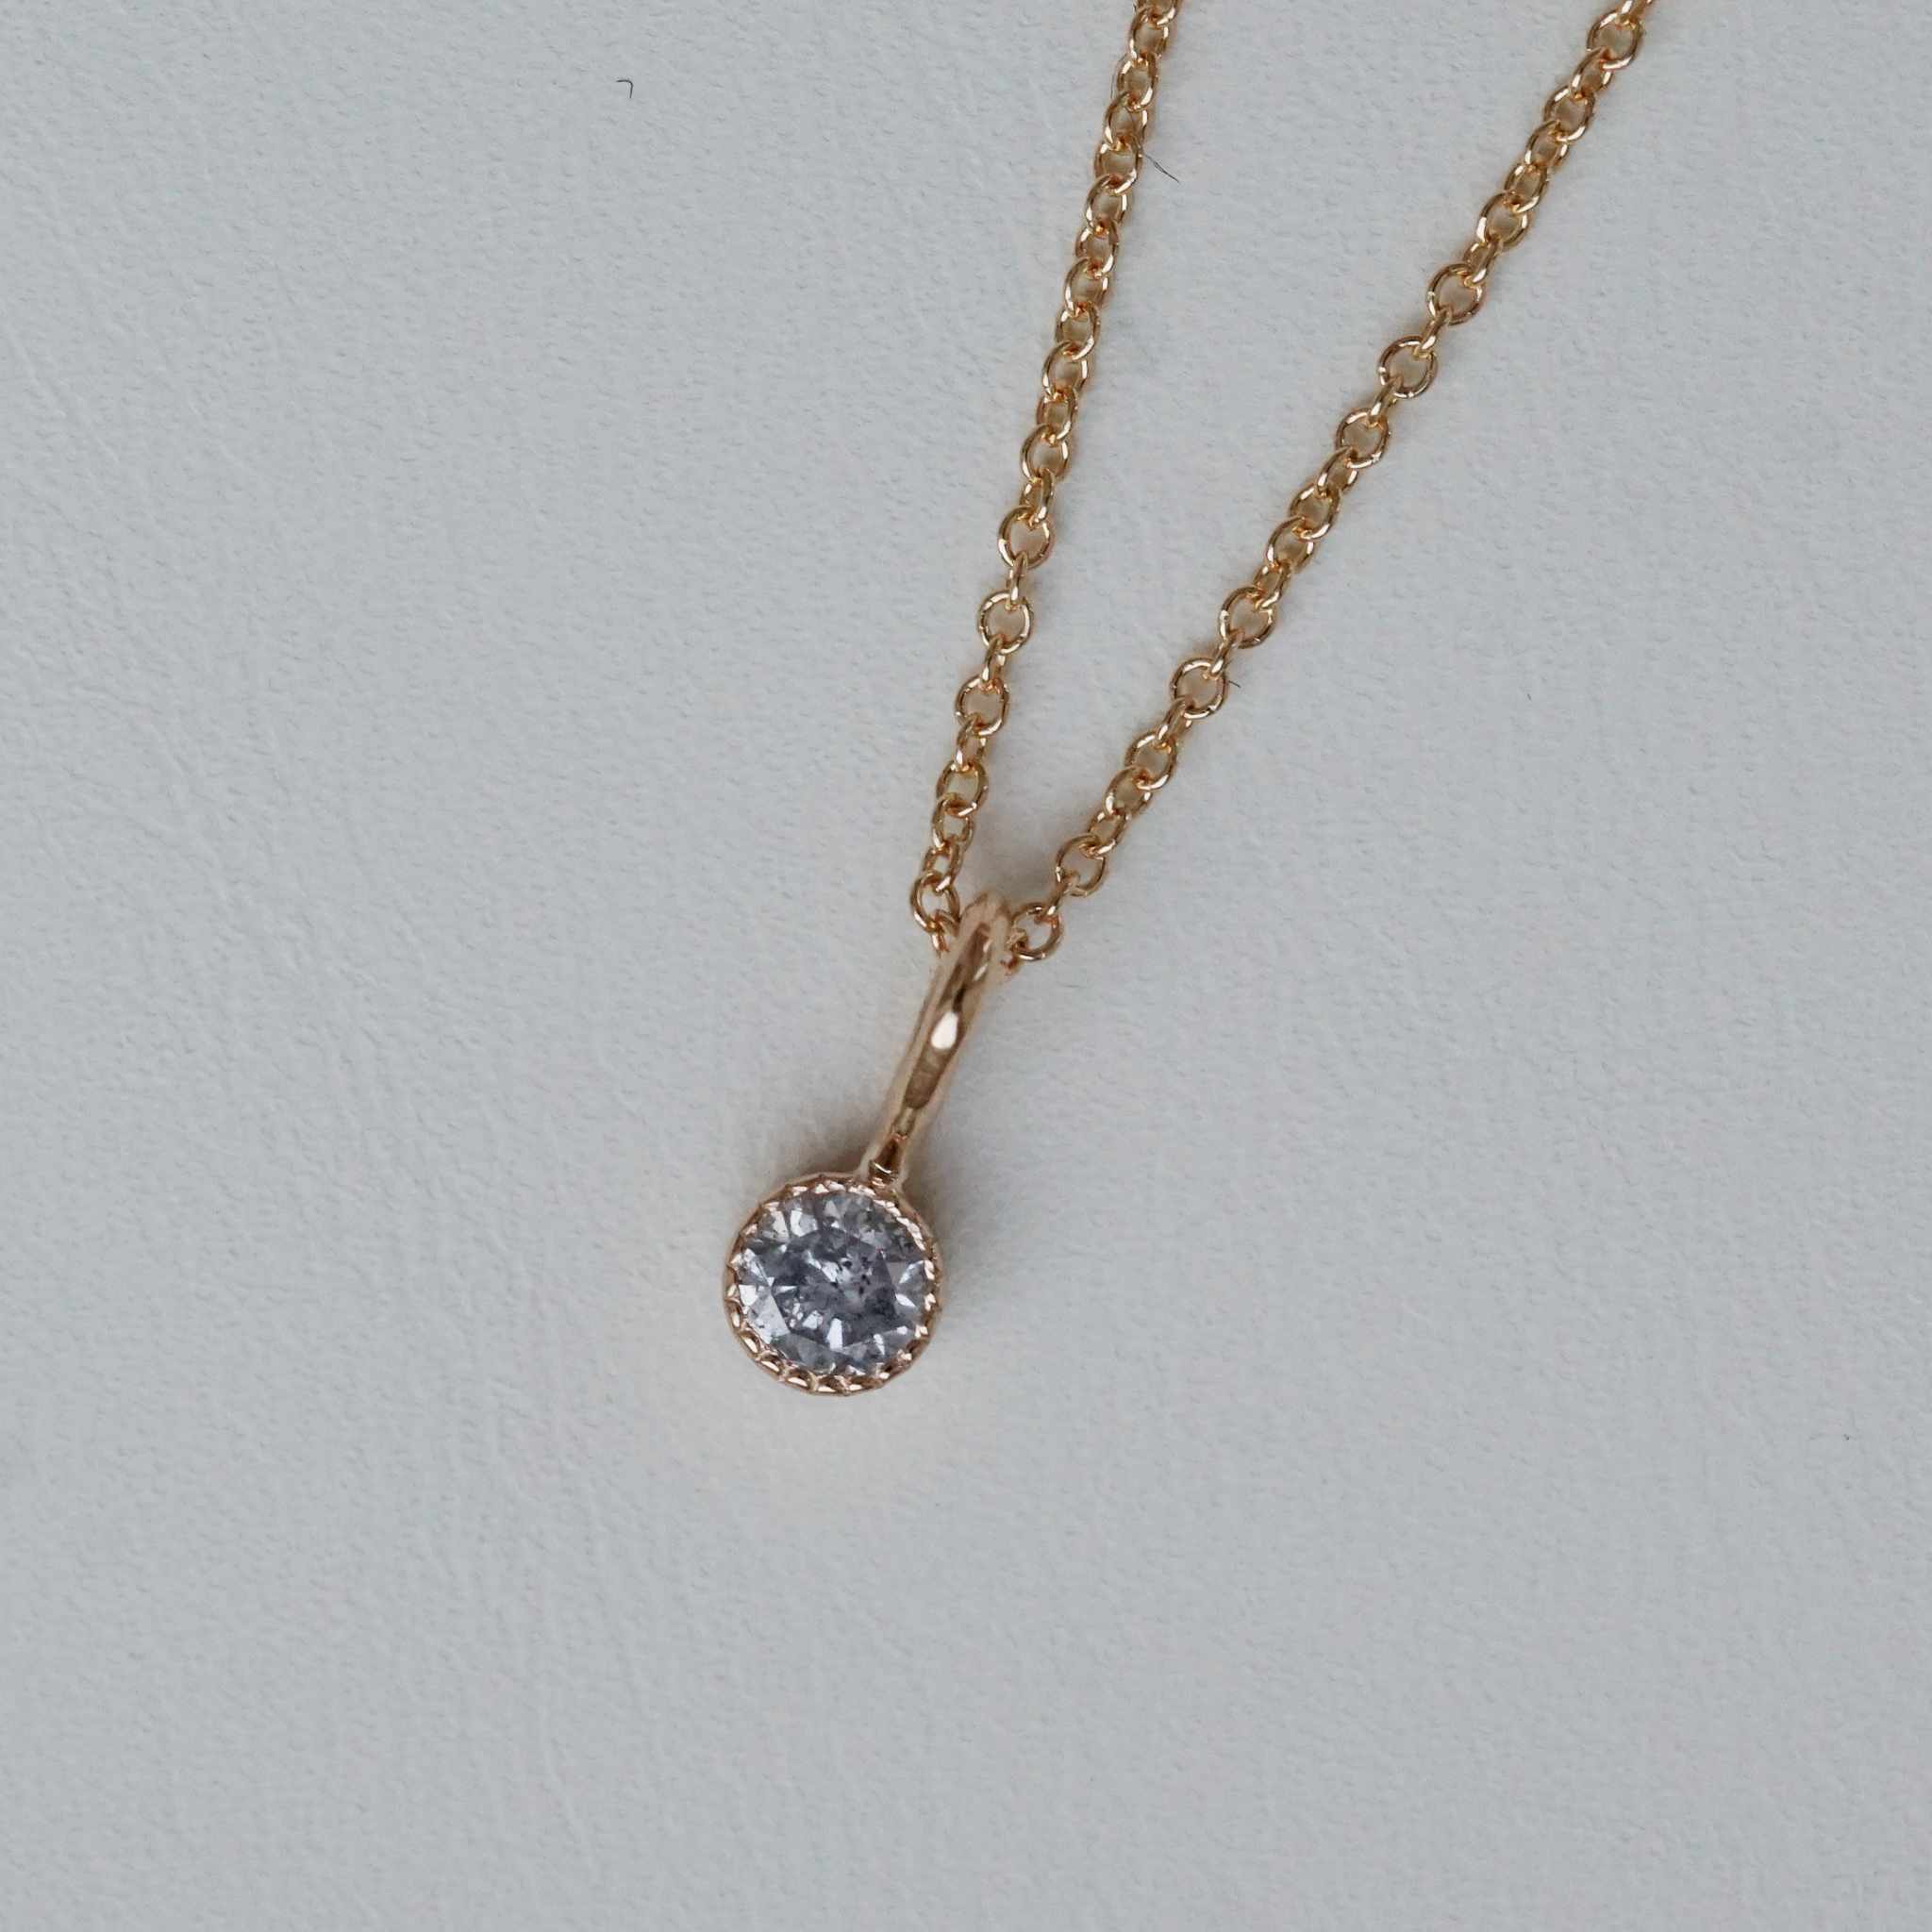 "Twinkle" pendant in gold with grey diamond